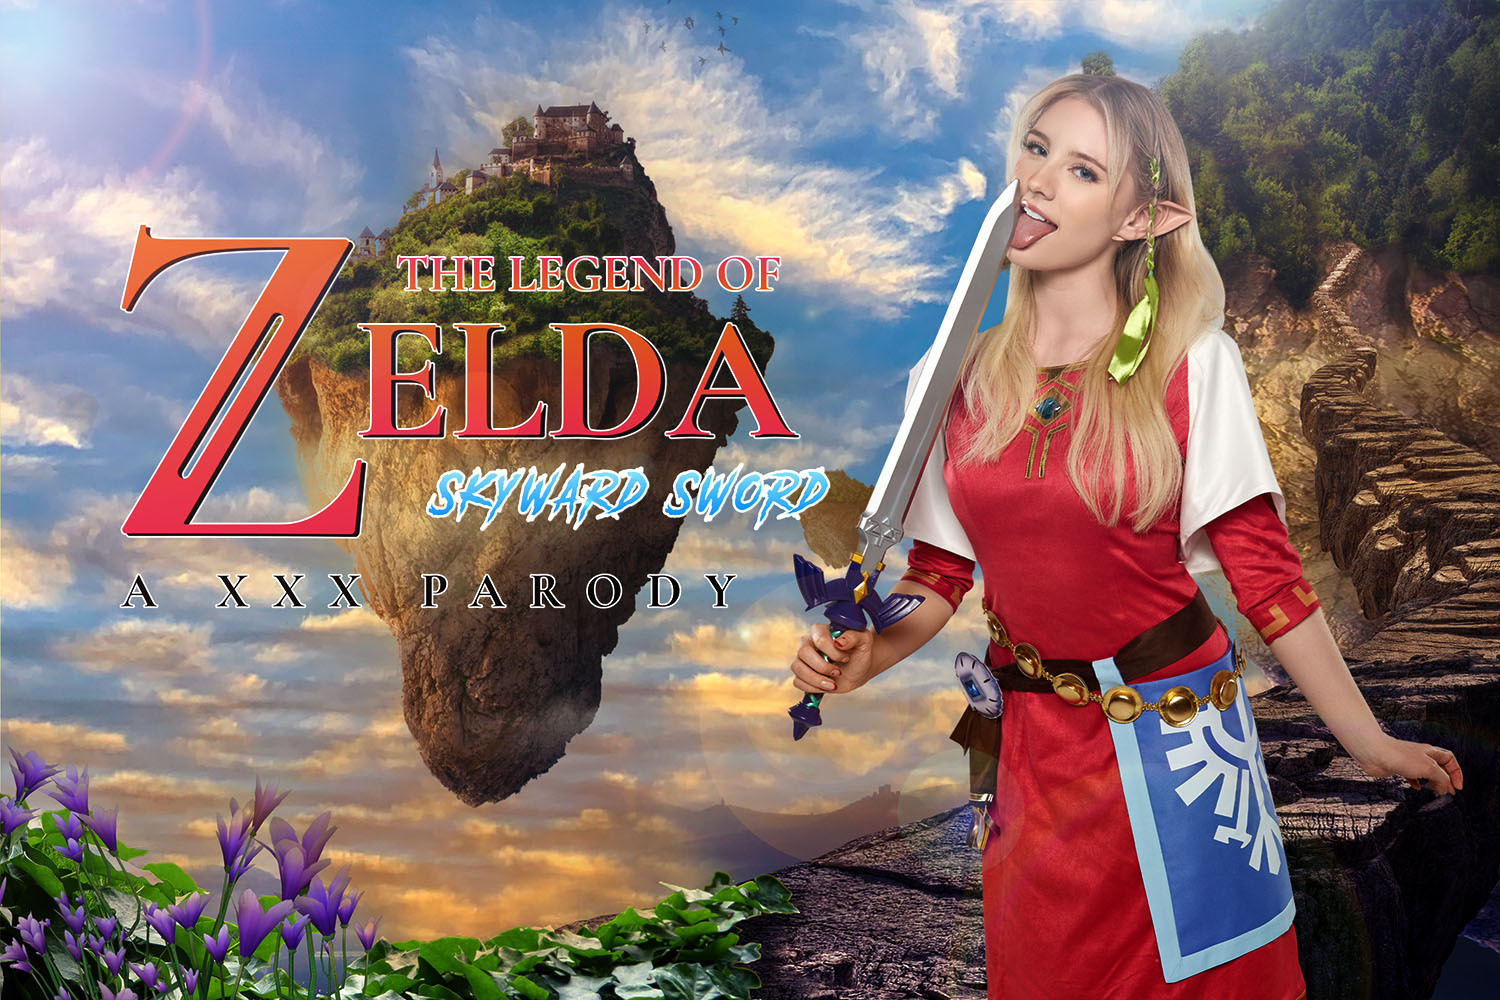 allan fitch recommends skyward sword porn pic